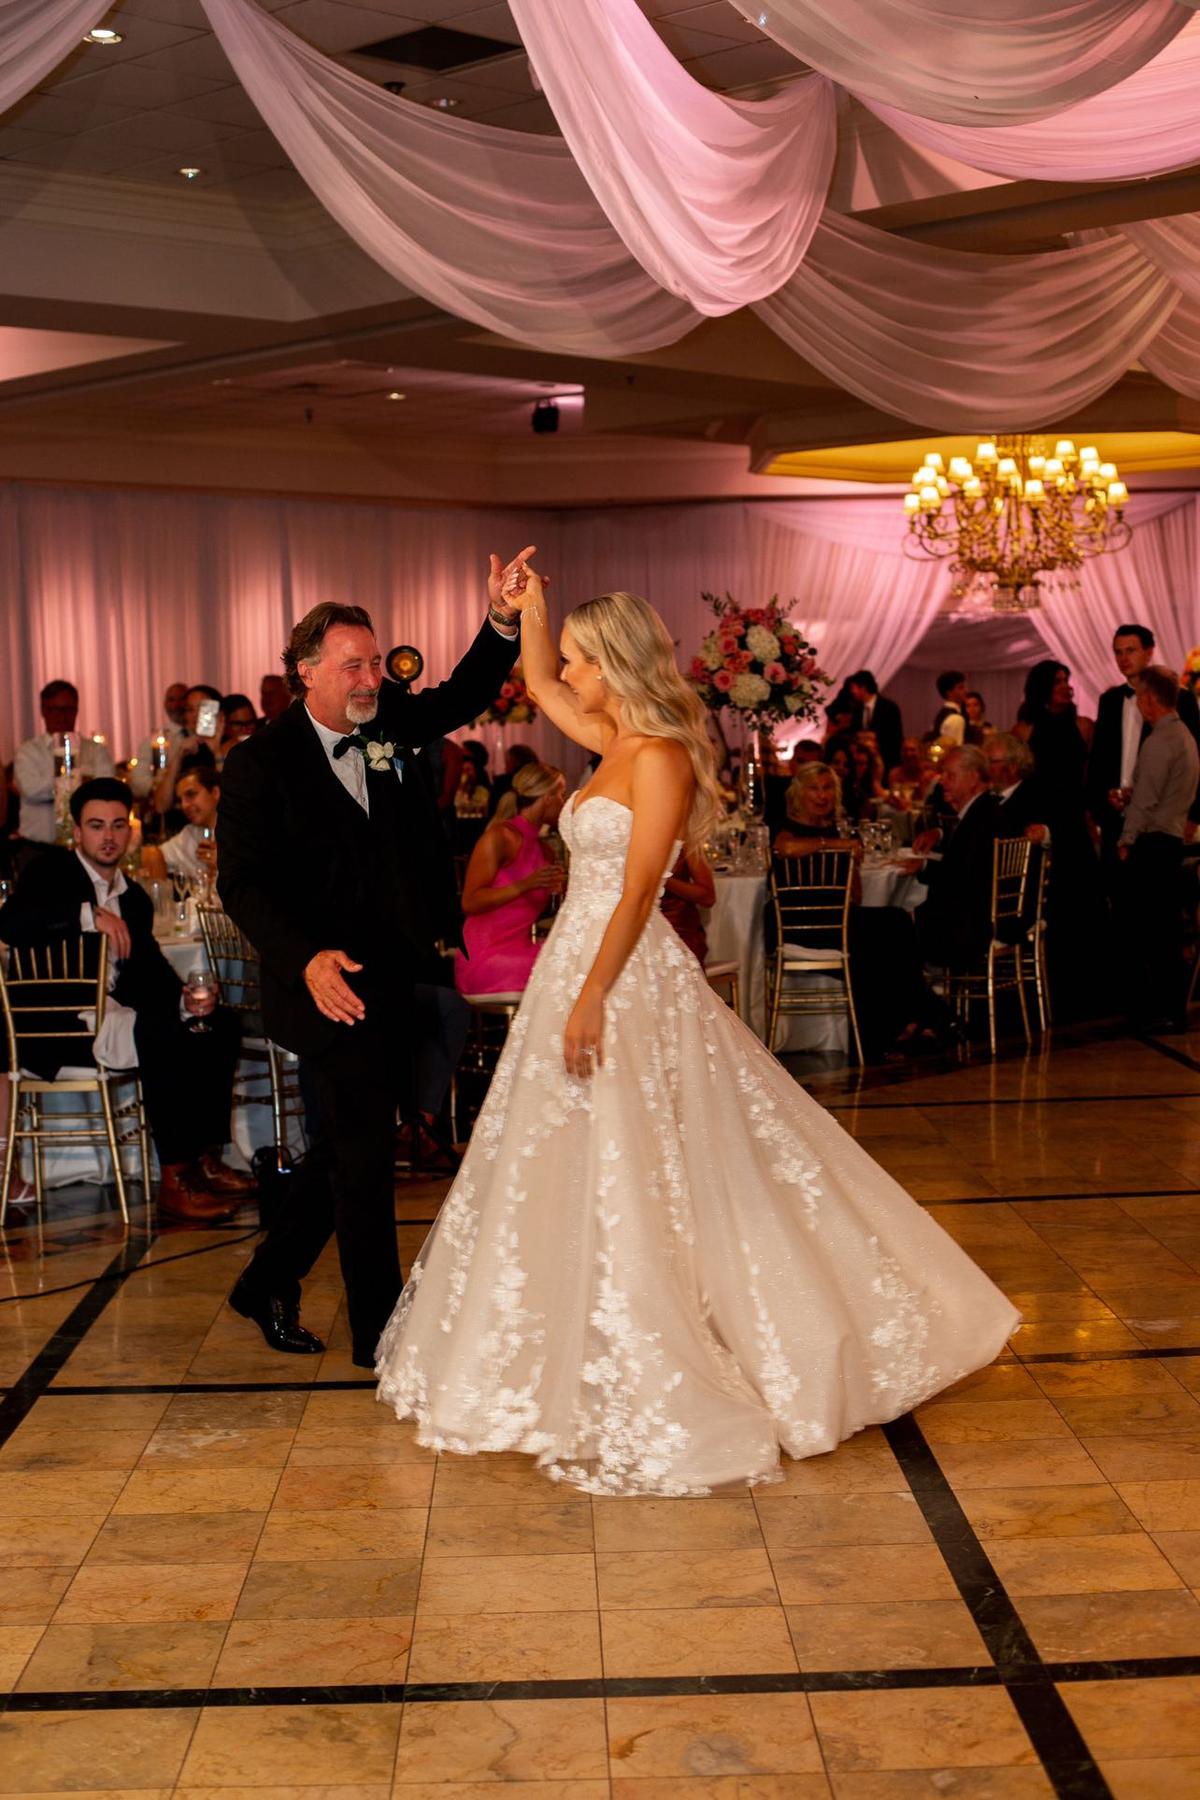 Cassi and her father Steve dancing at her wedding. (Courtesy of <a href="https://www.instagram.com/cassiadams_/">Cassi Adams</a>)